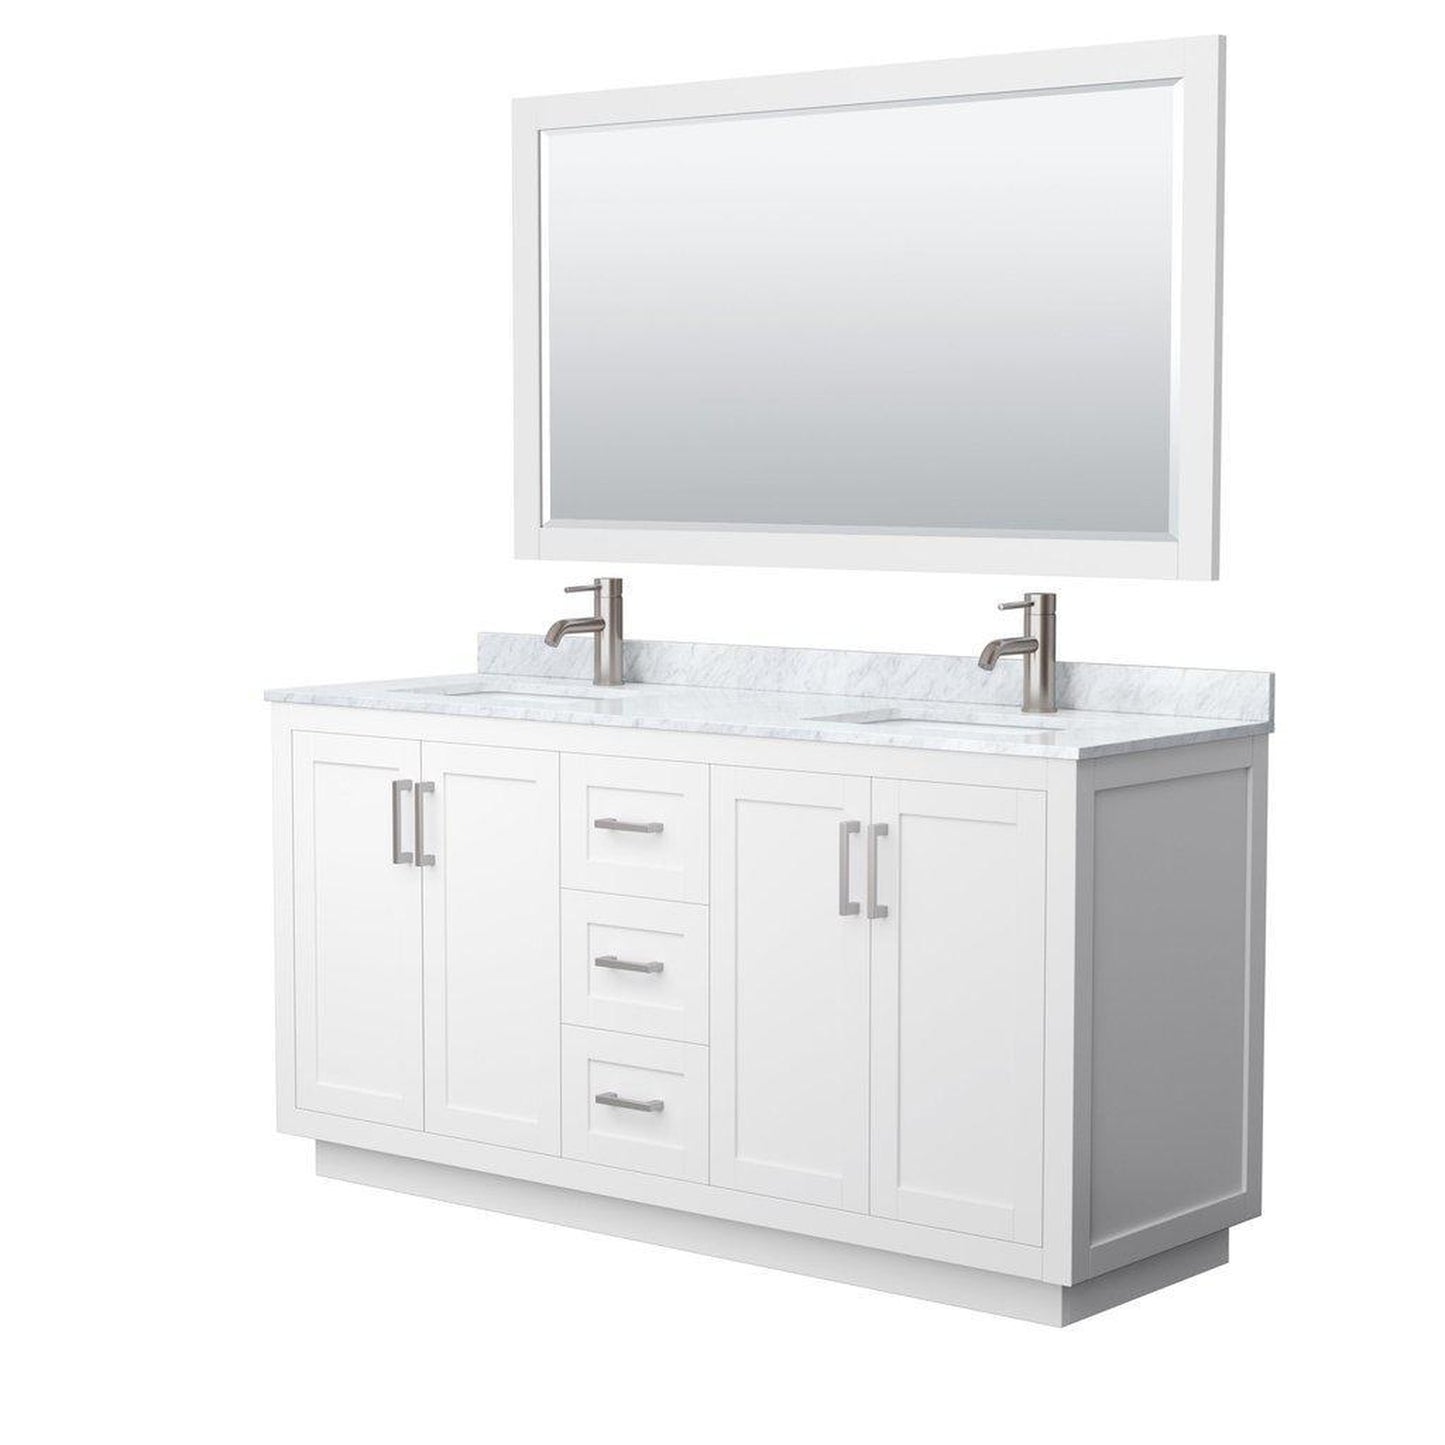 Wyndham Collection Miranda 66" Double Bathroom White Vanity Set With White Carrara Marble Countertop, Undermount Square Sink, 58" Mirror And Brushed Nickel Trim